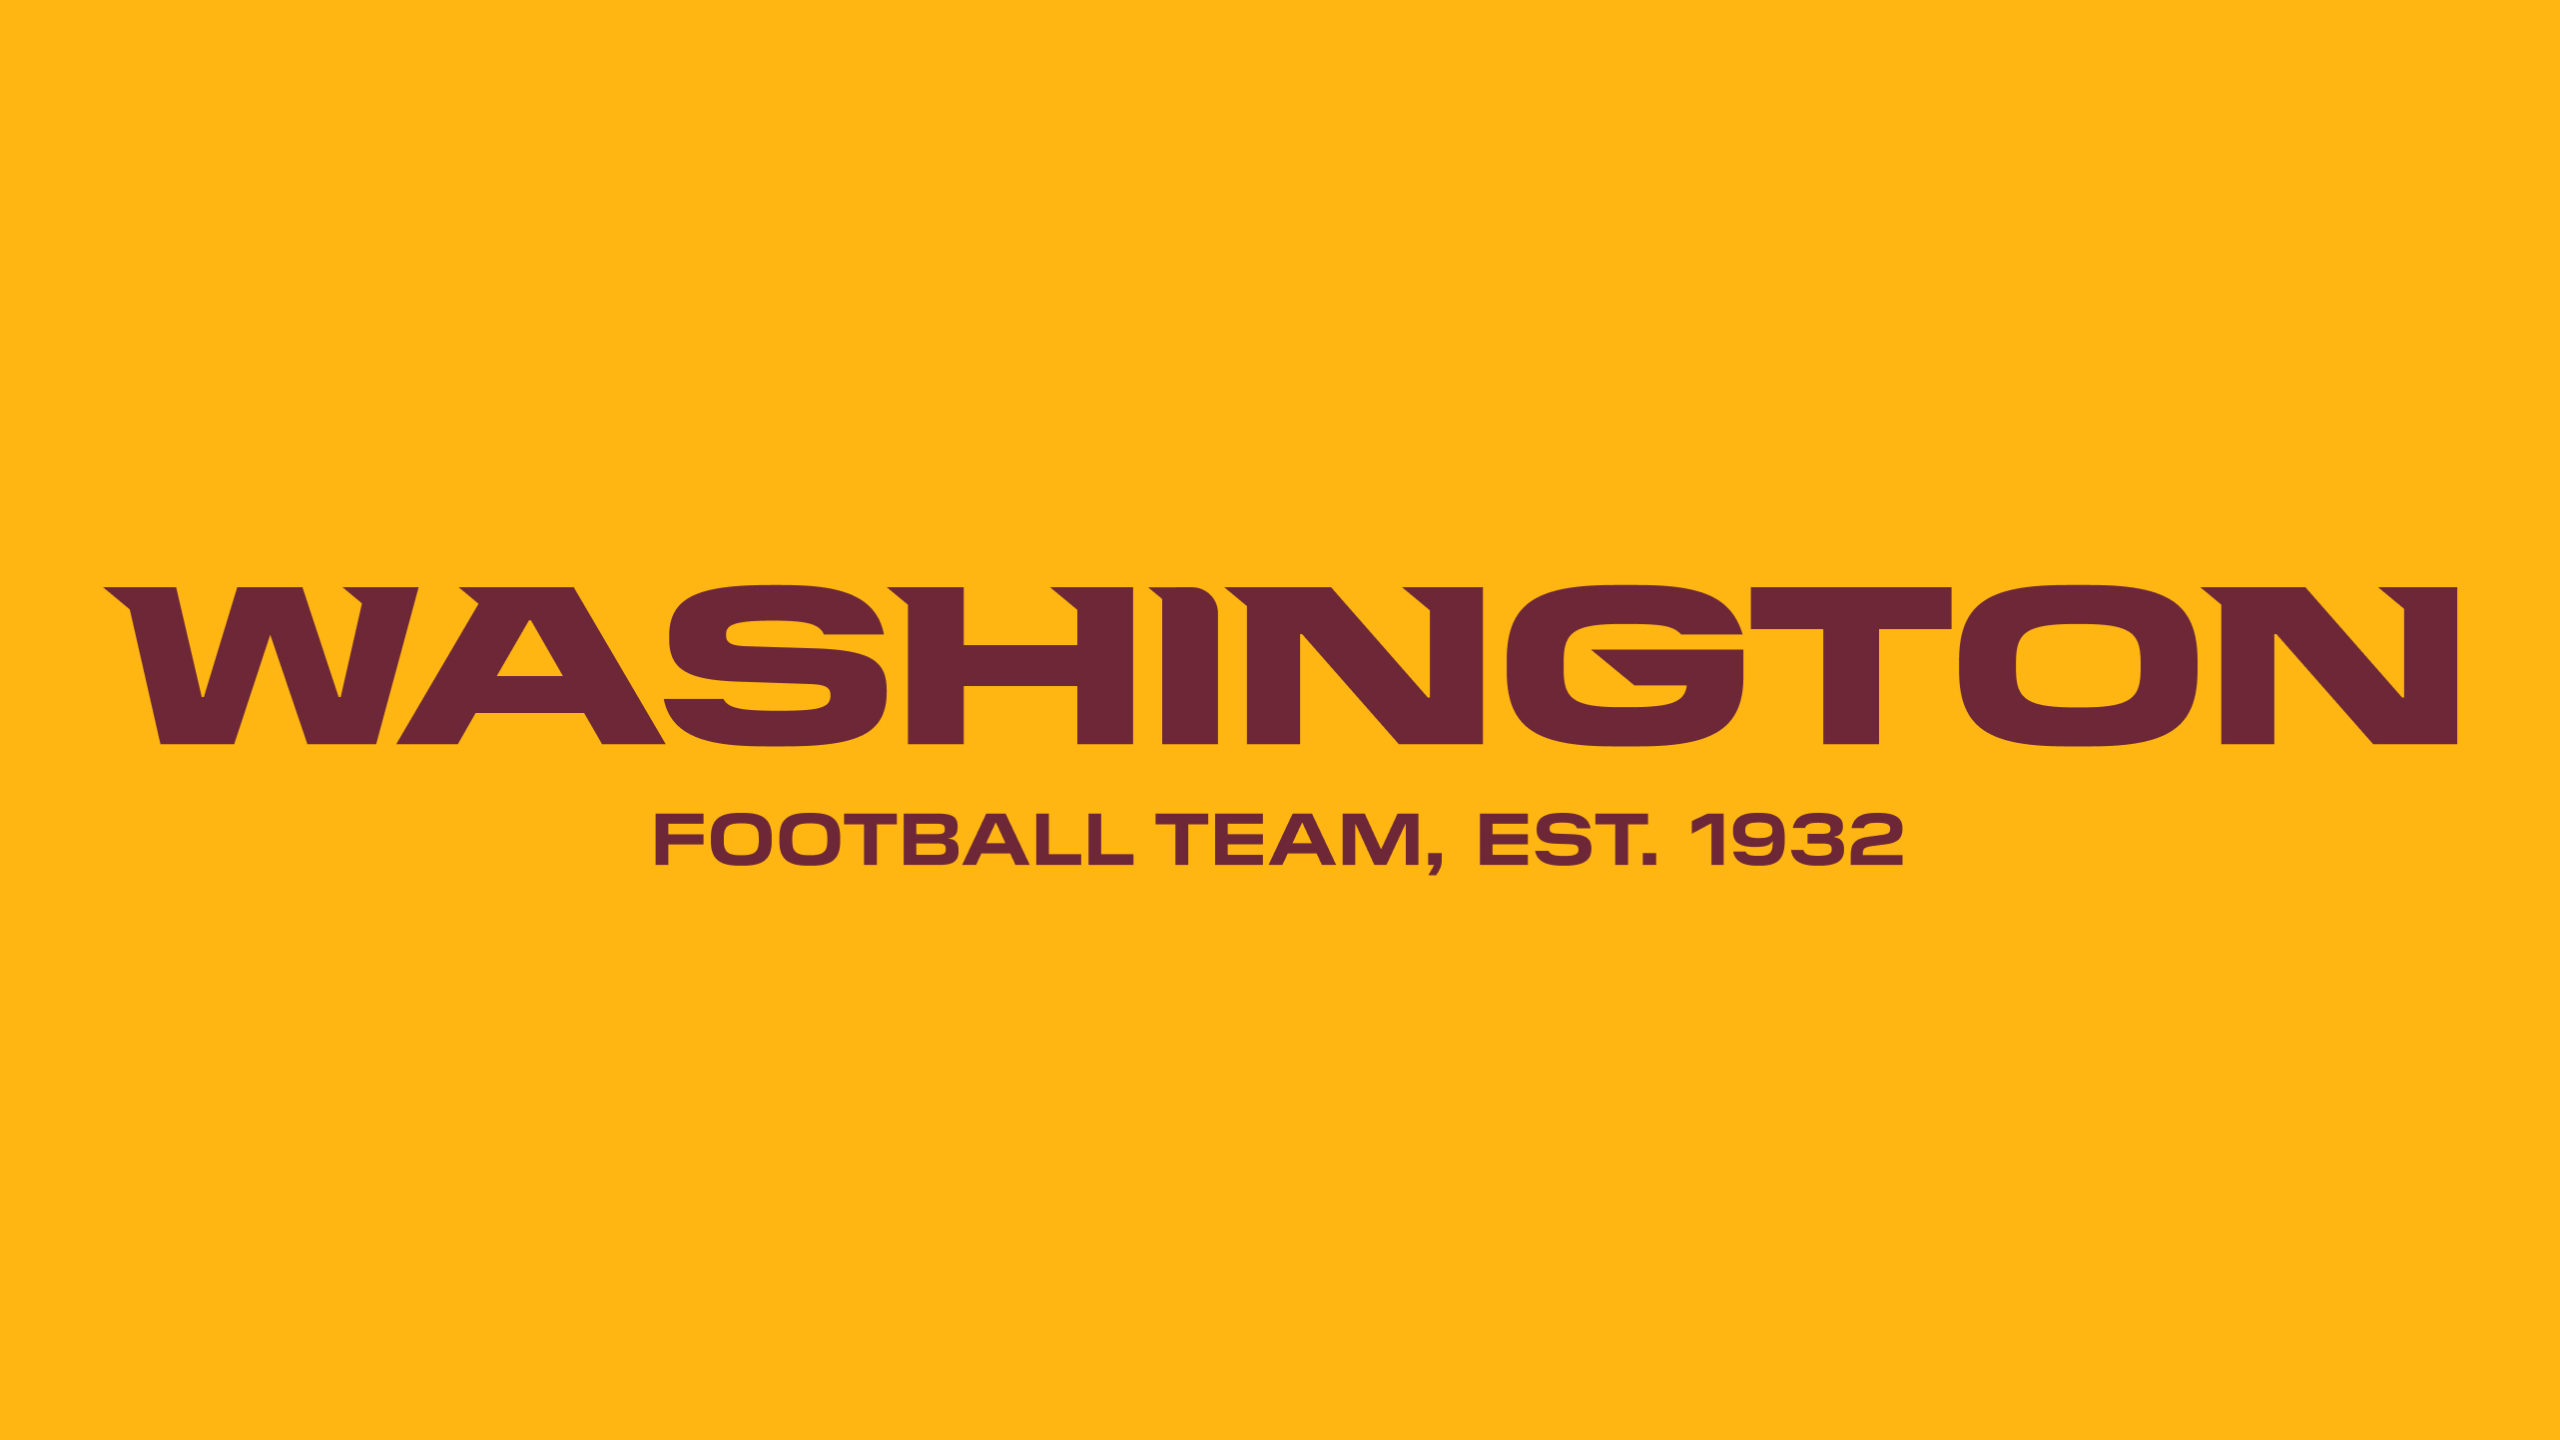 Featured image for “I’m a Lifelong Washington NFL Fan, and It’s Past Time To Change the Name”